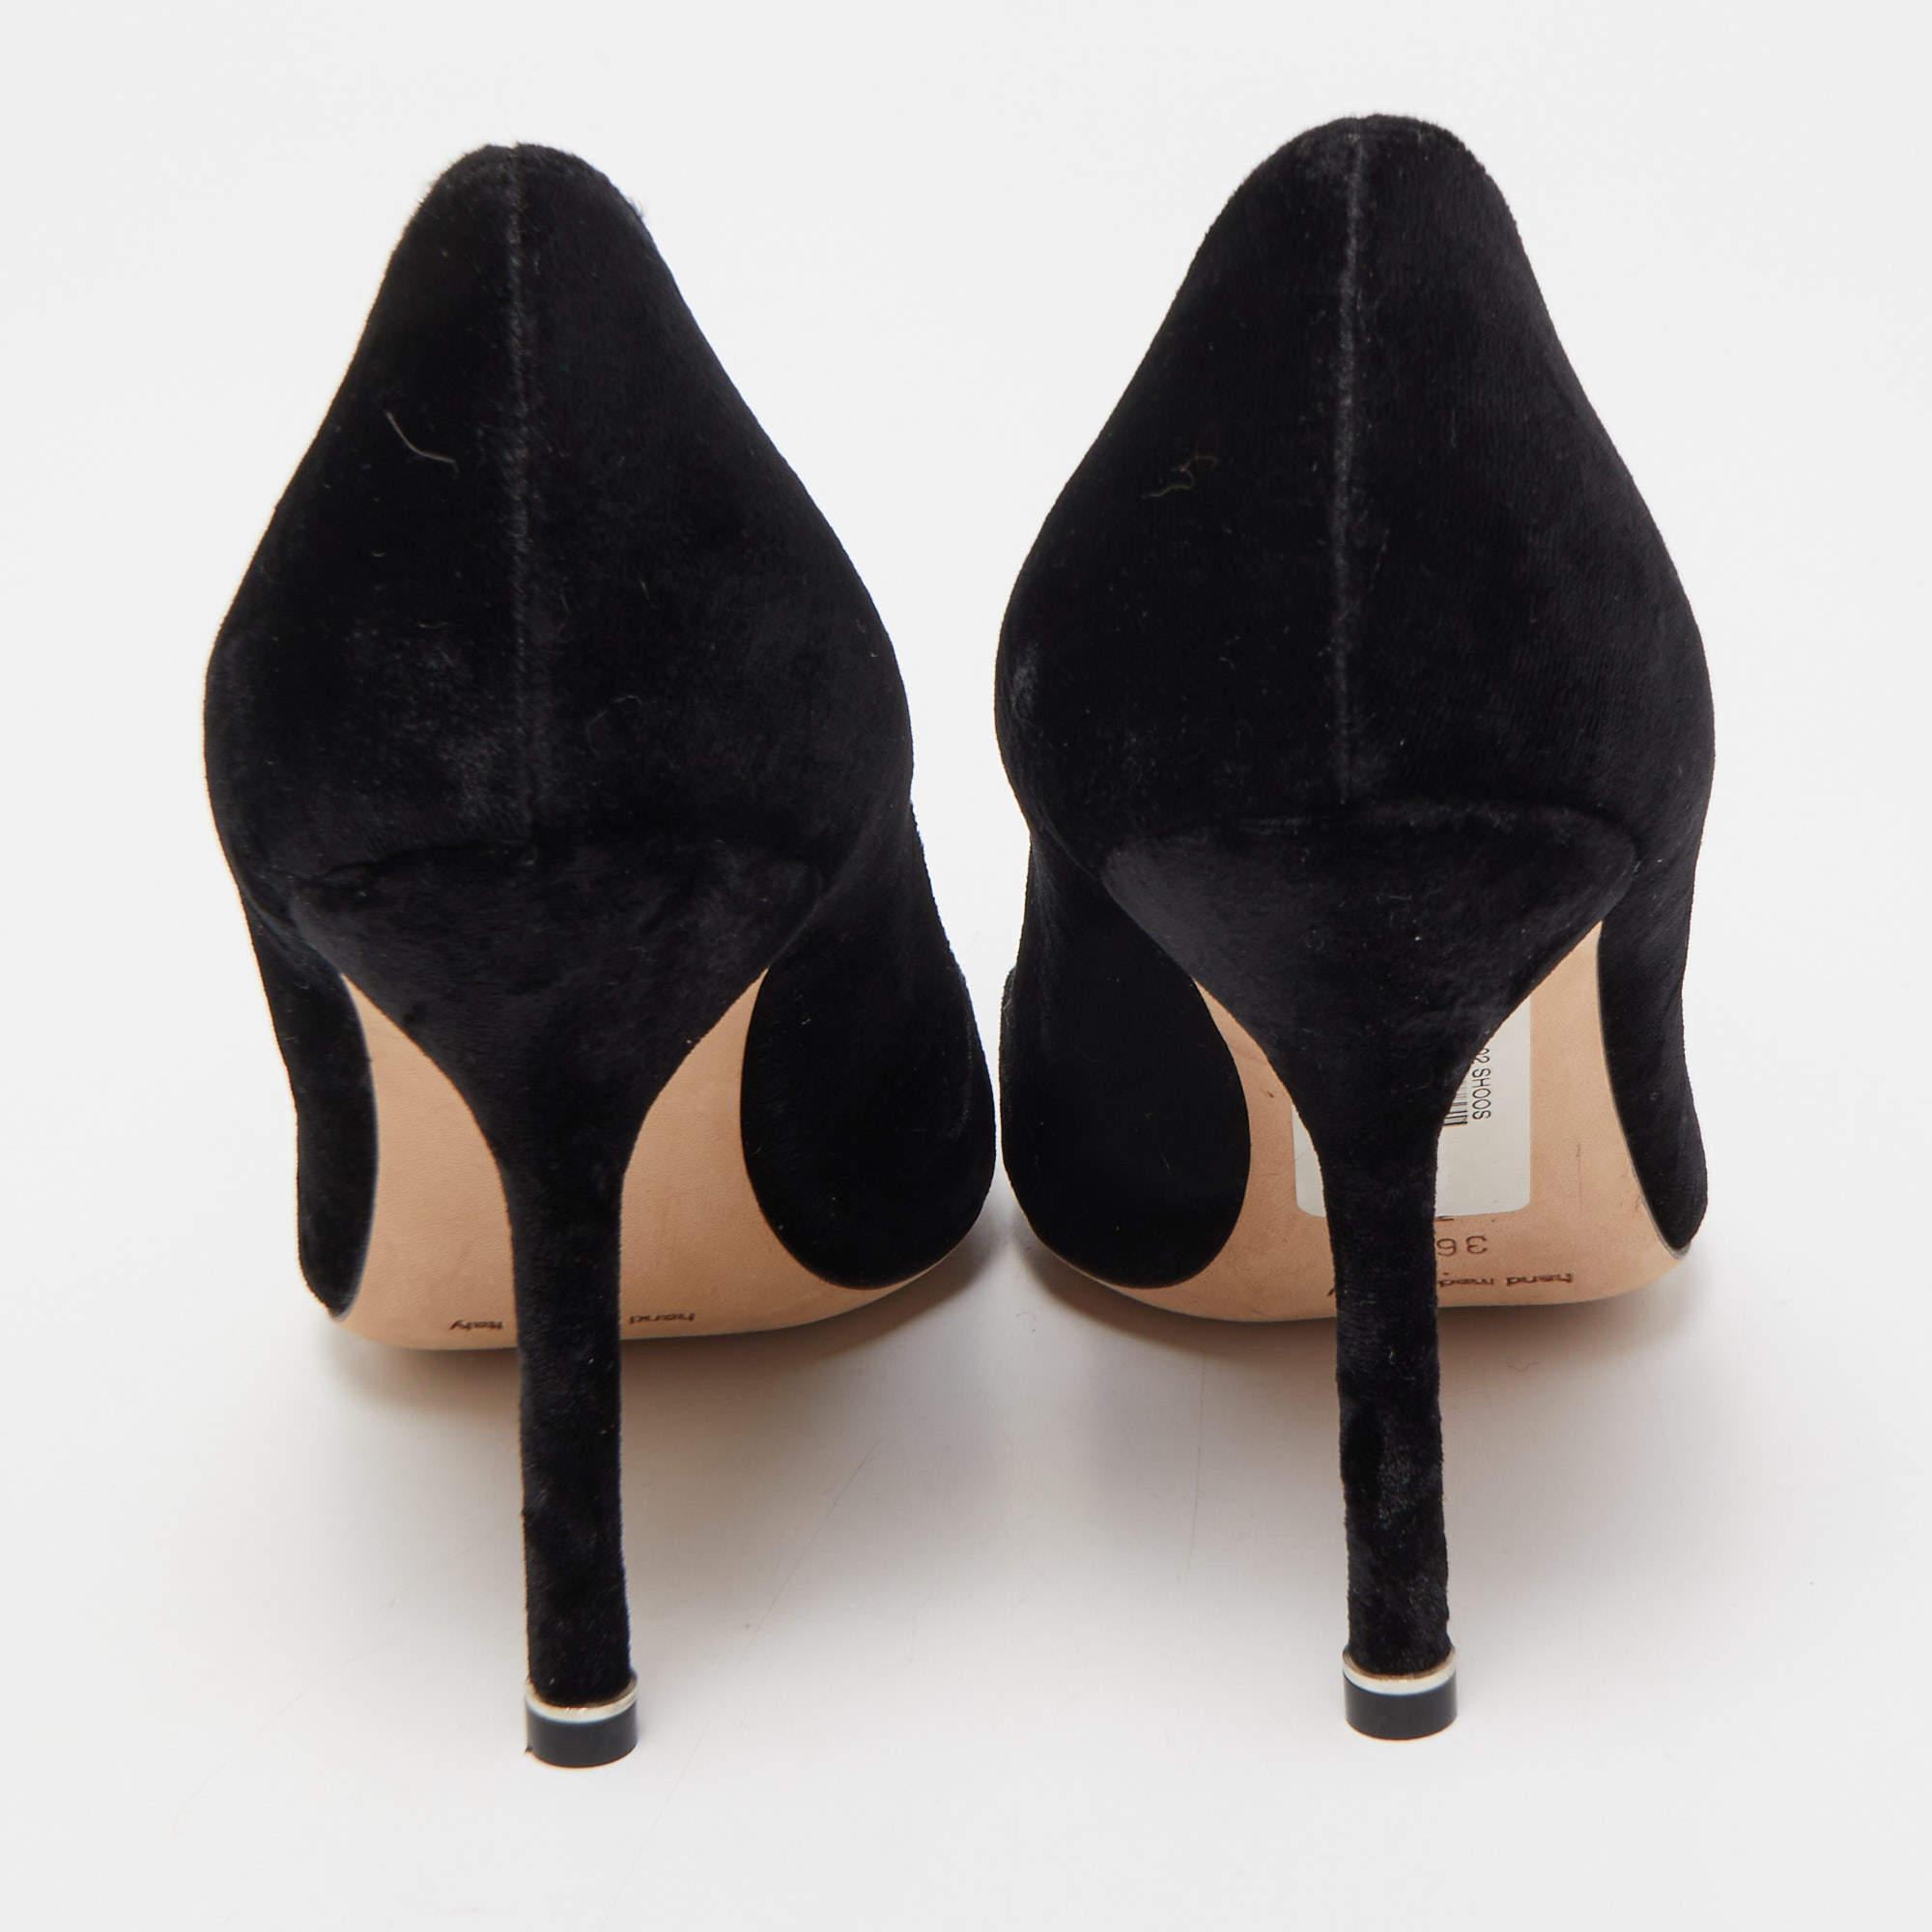 Manolo Blahnik is well-known for his graceful designs, and his label is synonymous with opulence, femininity, and elegance. These Hangisi pumps are shaped into a pointed-toe silhouette augmented by the embellishments perched on the uppers. They are